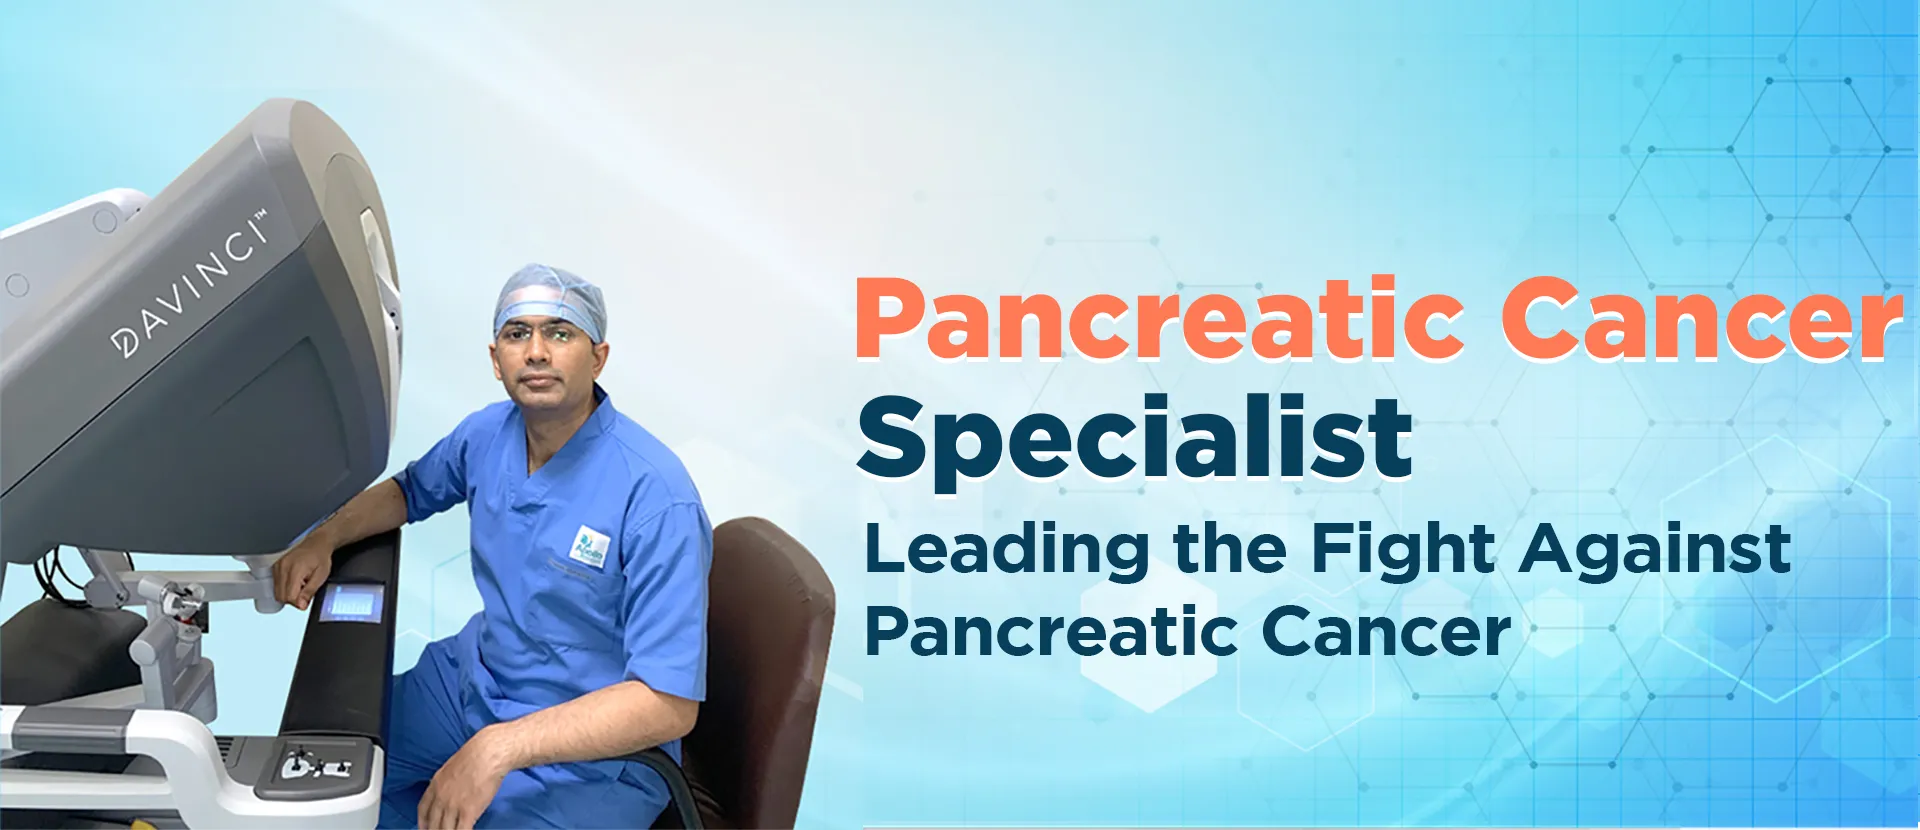 Best pancreatic cancer doctor and pancreatic cancer specialist in Ahmedabad, India